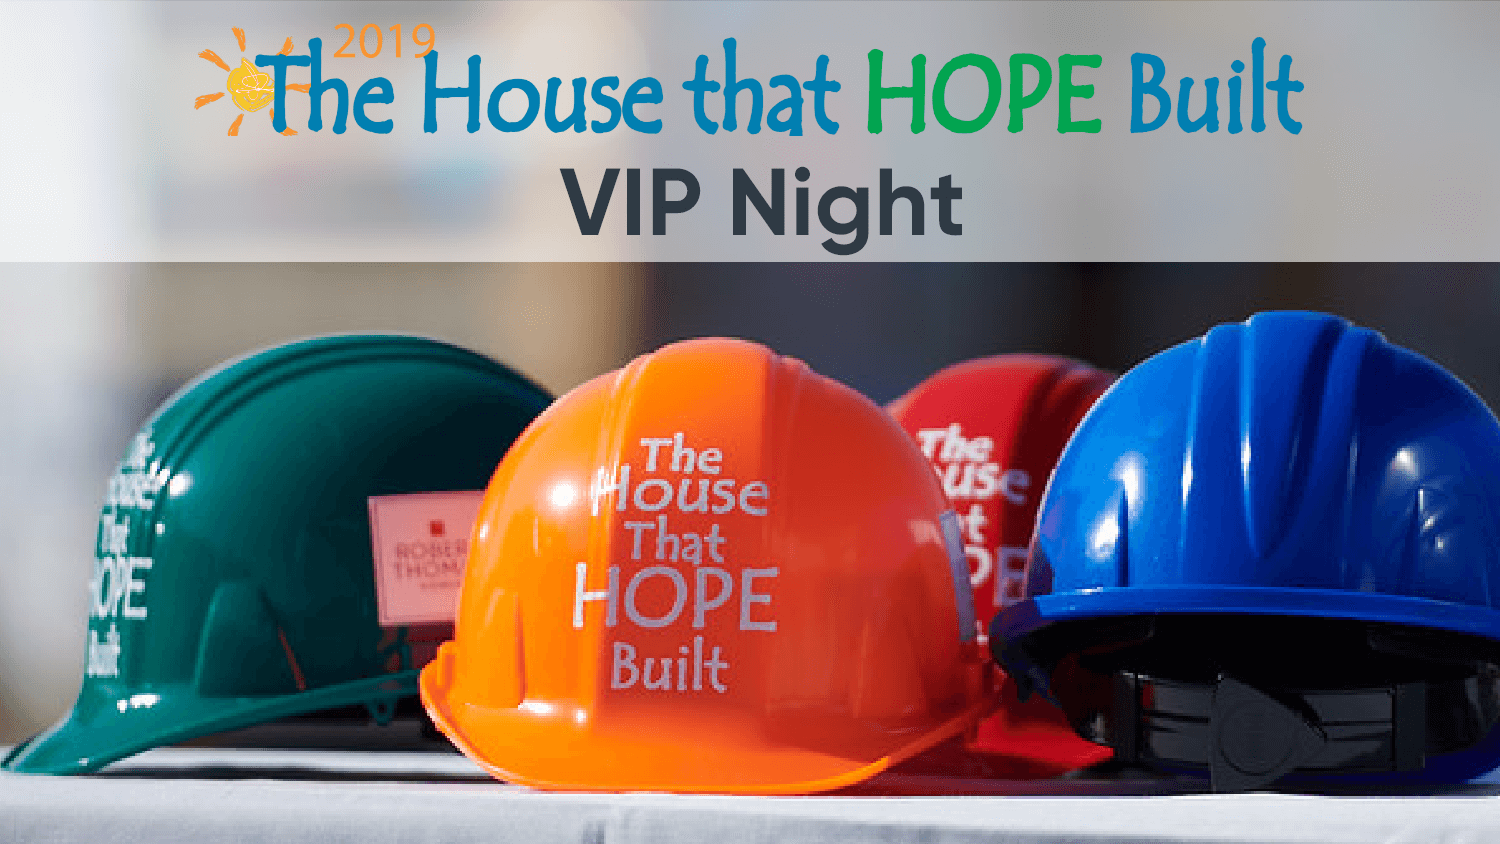 The 2019 House that Hope Built VIP Night